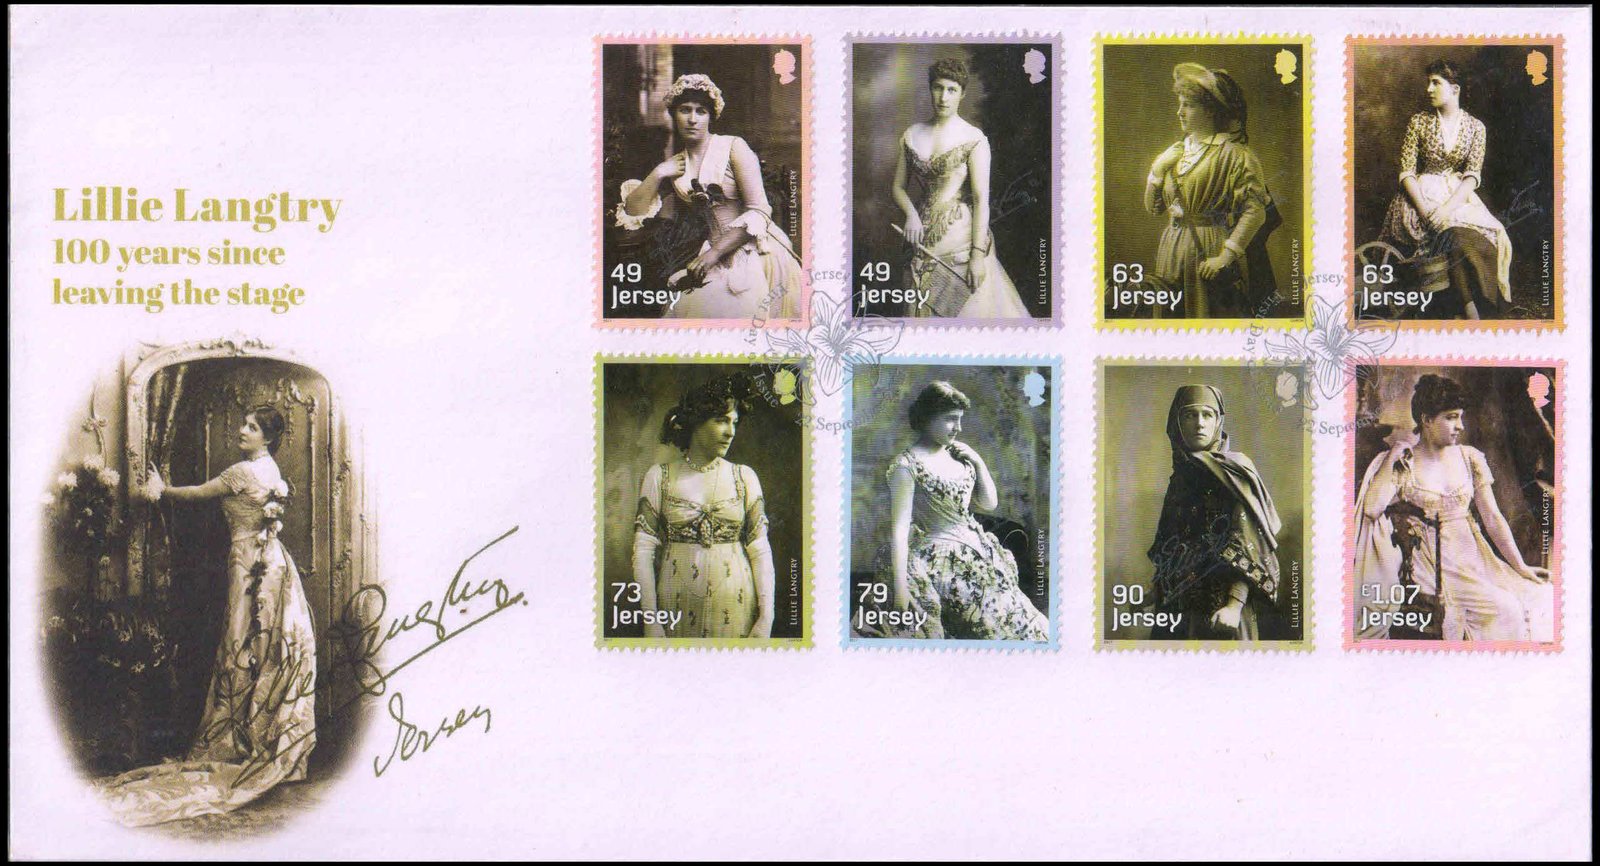 JERSEY 2017-Lillie Langtry, Actress-Film Cinema, Set of 8 on F.D.C, Face $ 6-S.G. 2192-2199-Cat � 6-